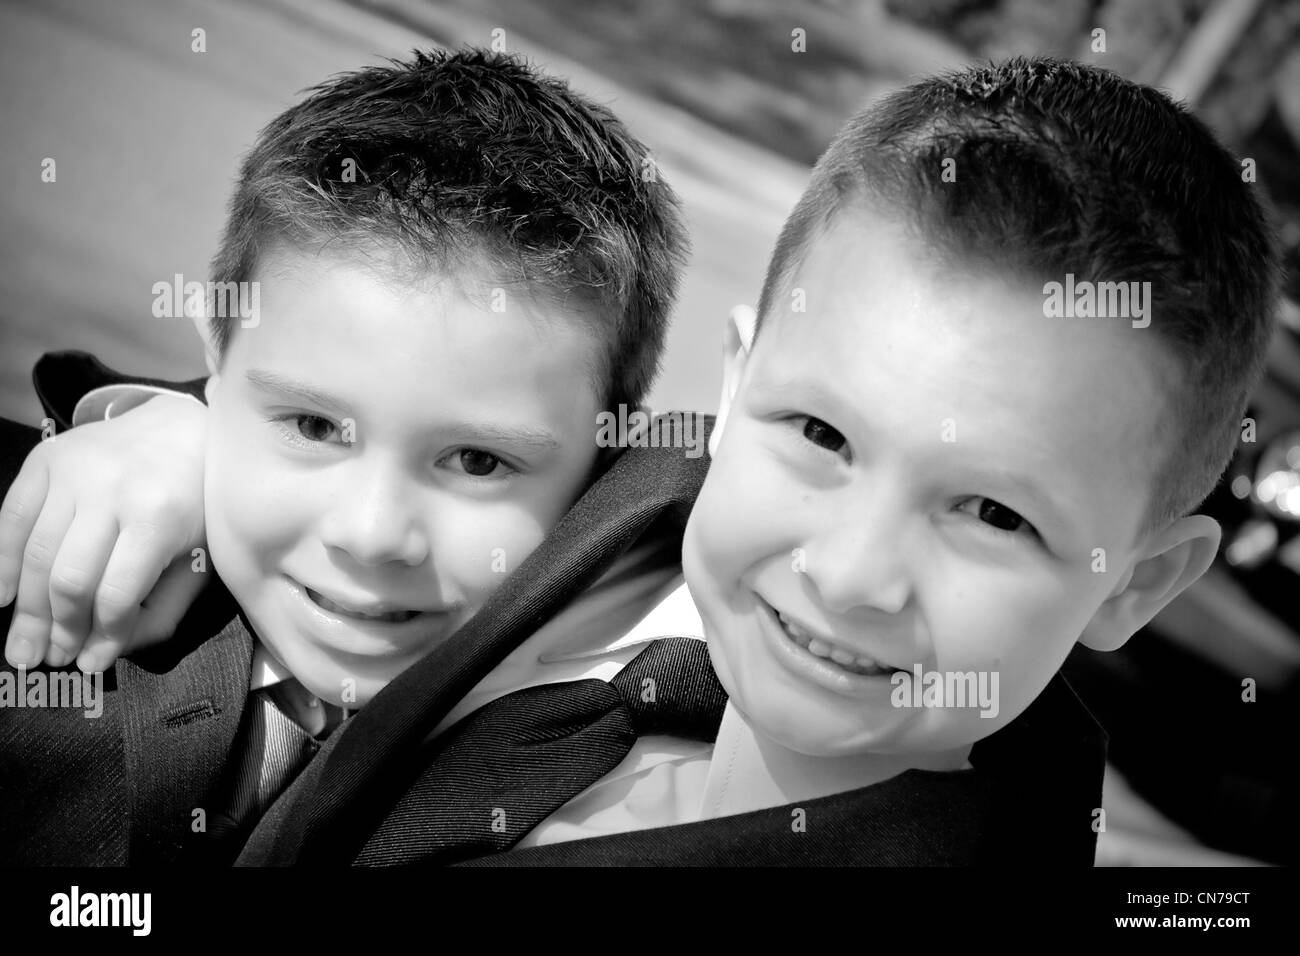 Two happy young boys dressed in suits with smiles on their faces. Black and white. Stock Photo